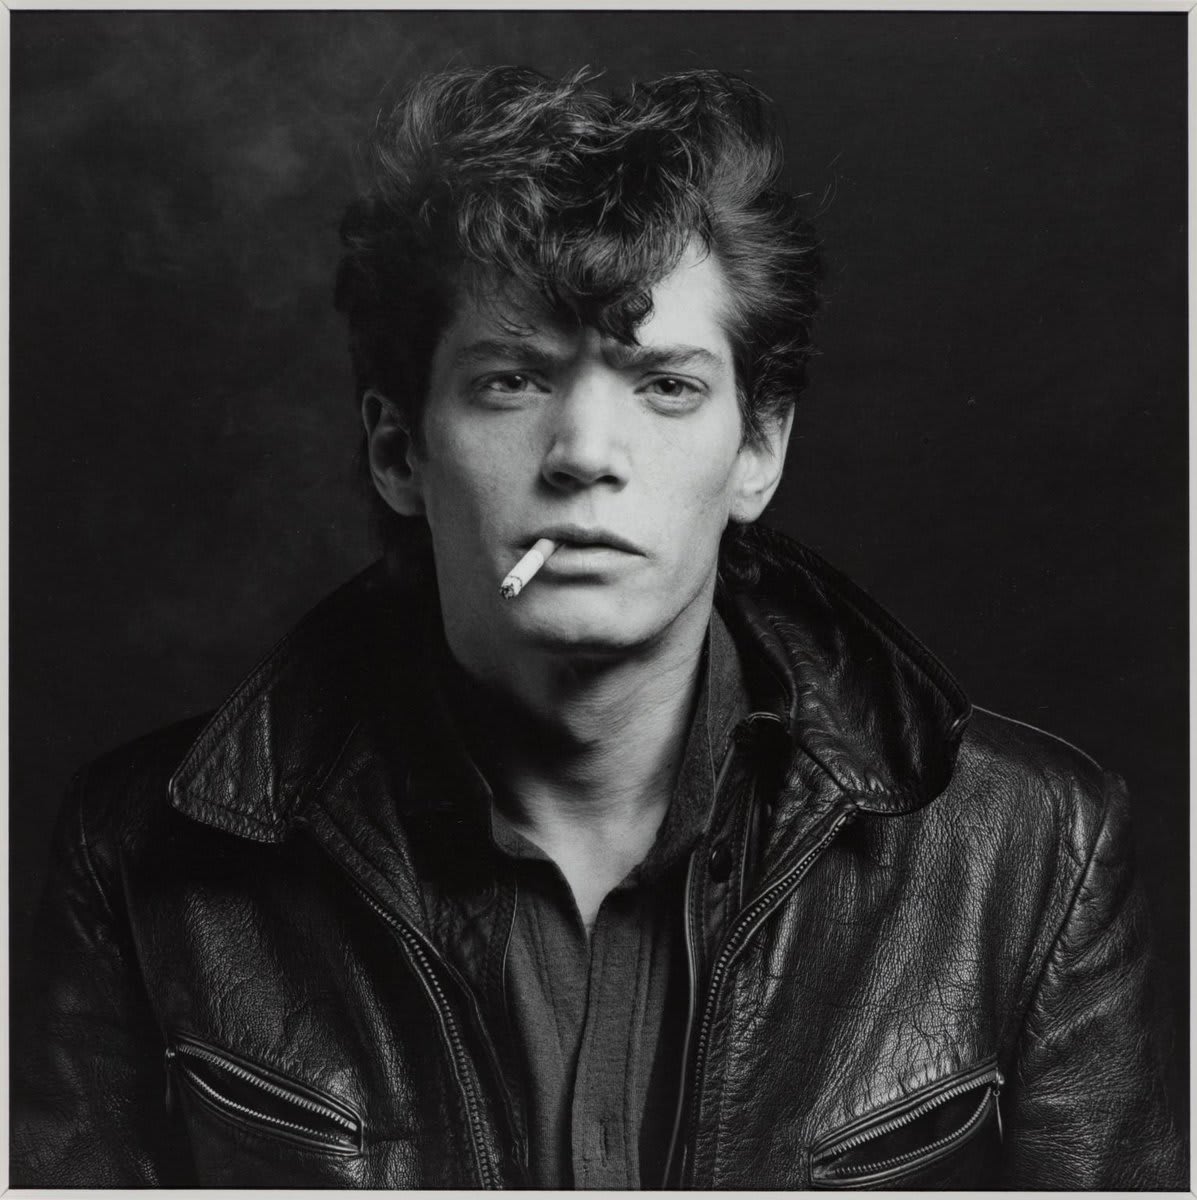 'I went into photography because it seemed like the perfect vehicle for commenting on the madness of today's existence.' - RobertMapplethorpe Robert Mapplethorpe, Self Portrait 1980.